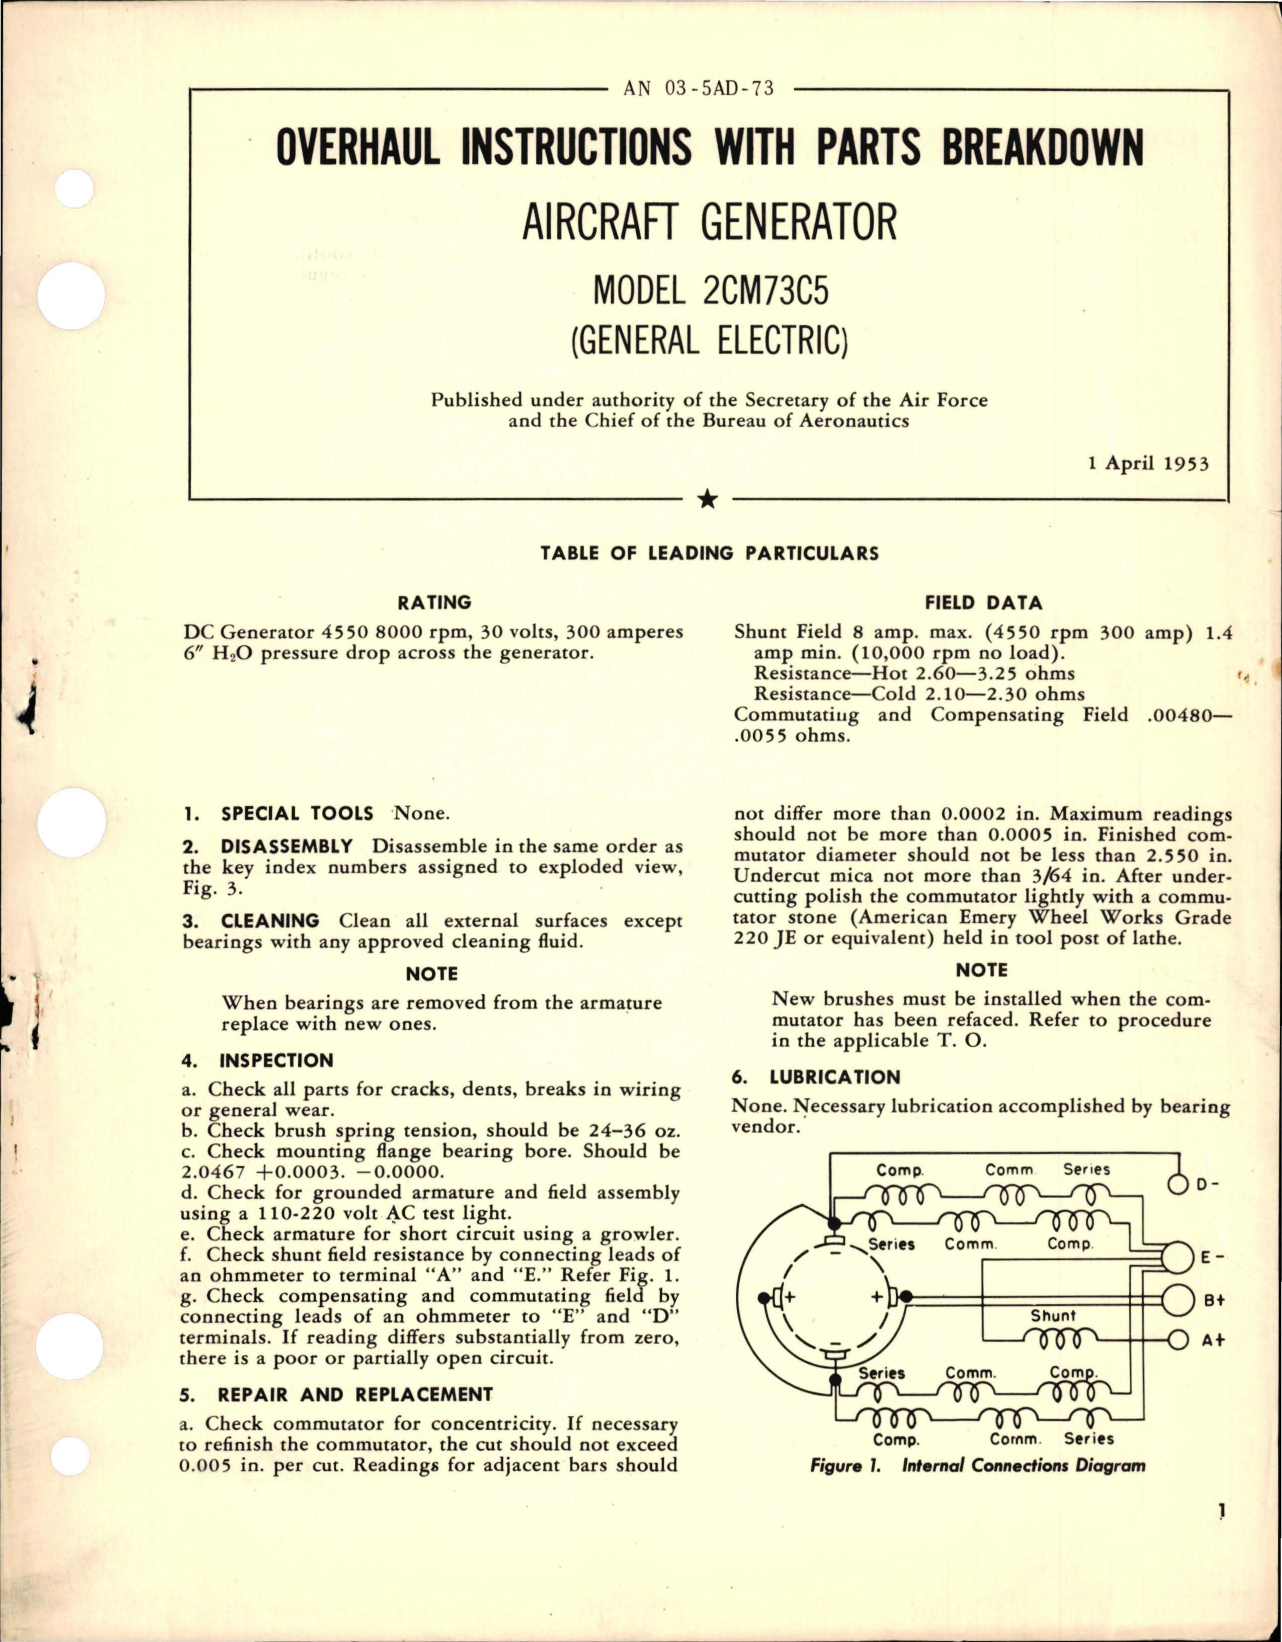 Sample page 1 from AirCorps Library document: Overhaul Instructions with Parts Breakdown for Aircraft Generator - Model 2CM73C5